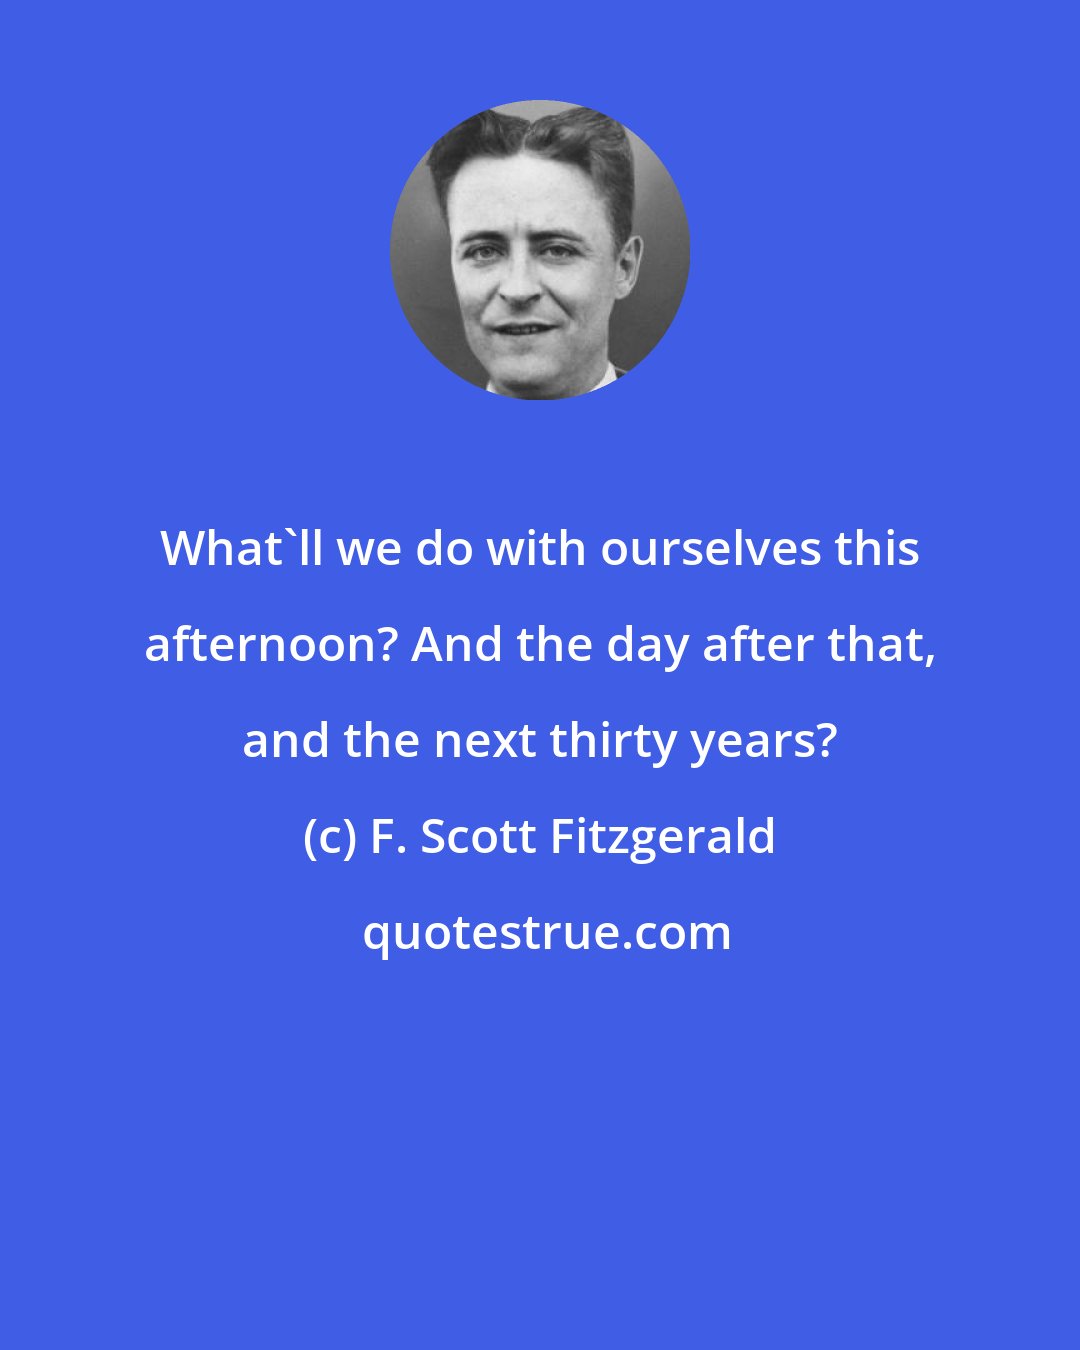 F. Scott Fitzgerald: What'll we do with ourselves this afternoon? And the day after that, and the next thirty years?